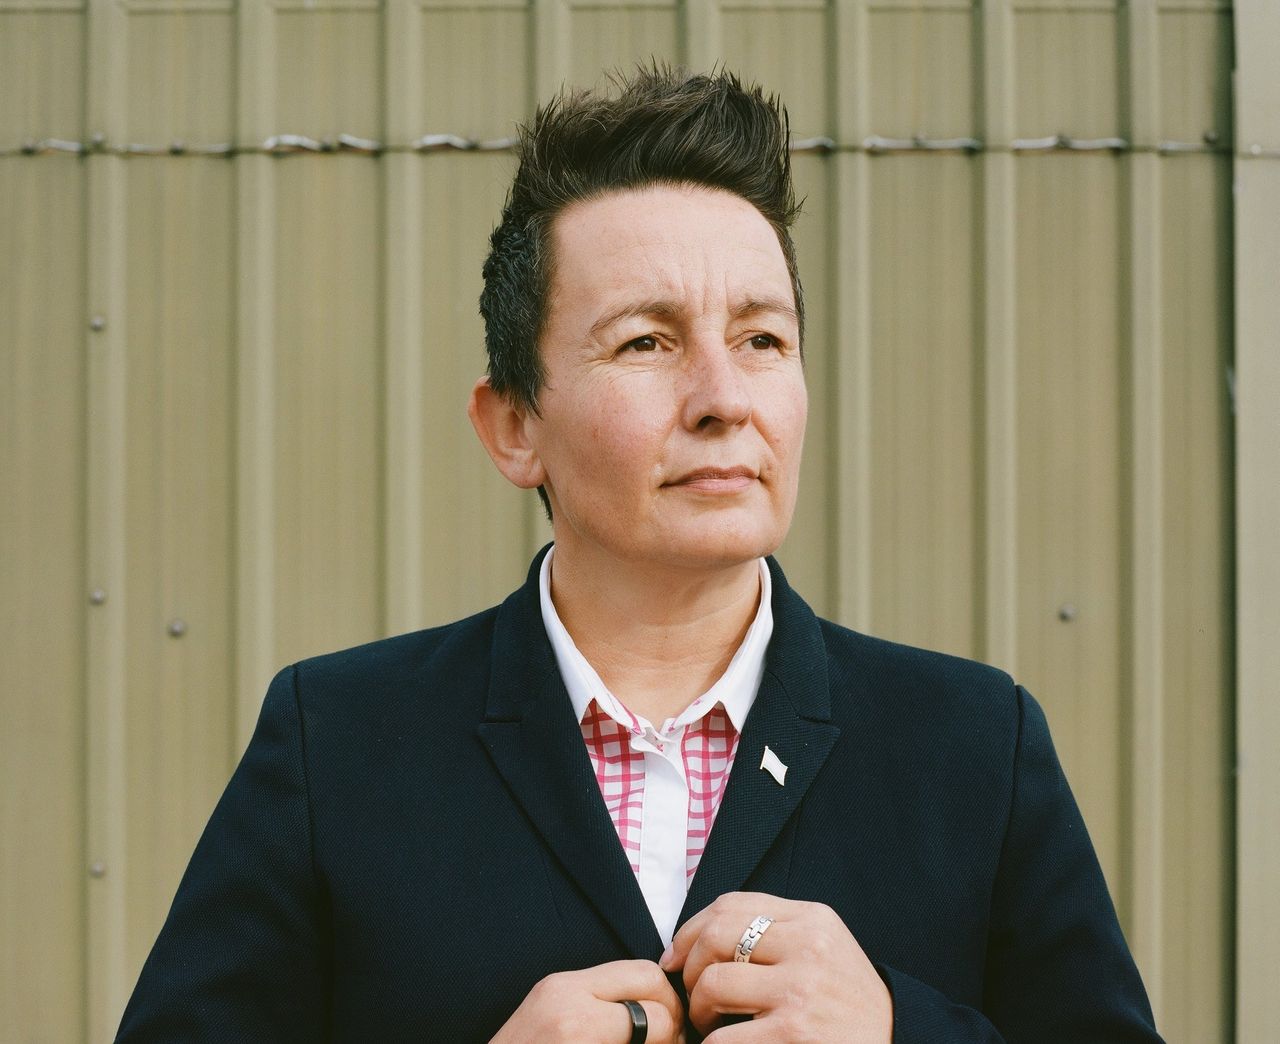 Tracy O’Hara is a a police detective constable in Merseyside and co-chair of the National Police LGBT Network and chair of the Merseyside Police Lesbian, Gay, Bisexual and Transgender (LGBT) Staff Support Network